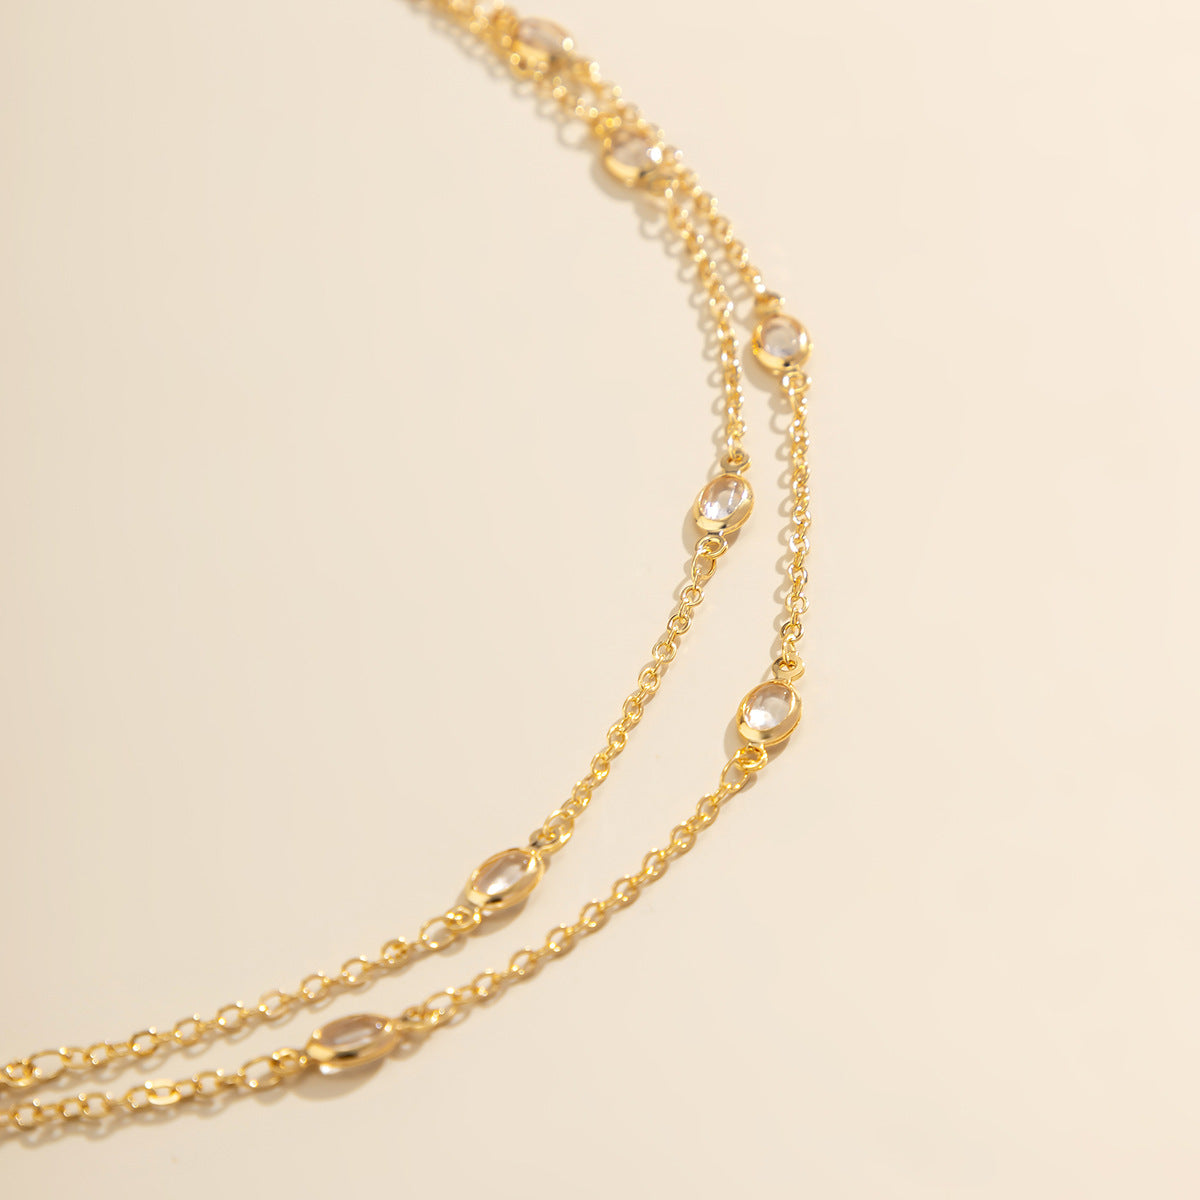 Elegant Zircon Waist Chain Necklace and Body Chain from Vienna Verve Collection